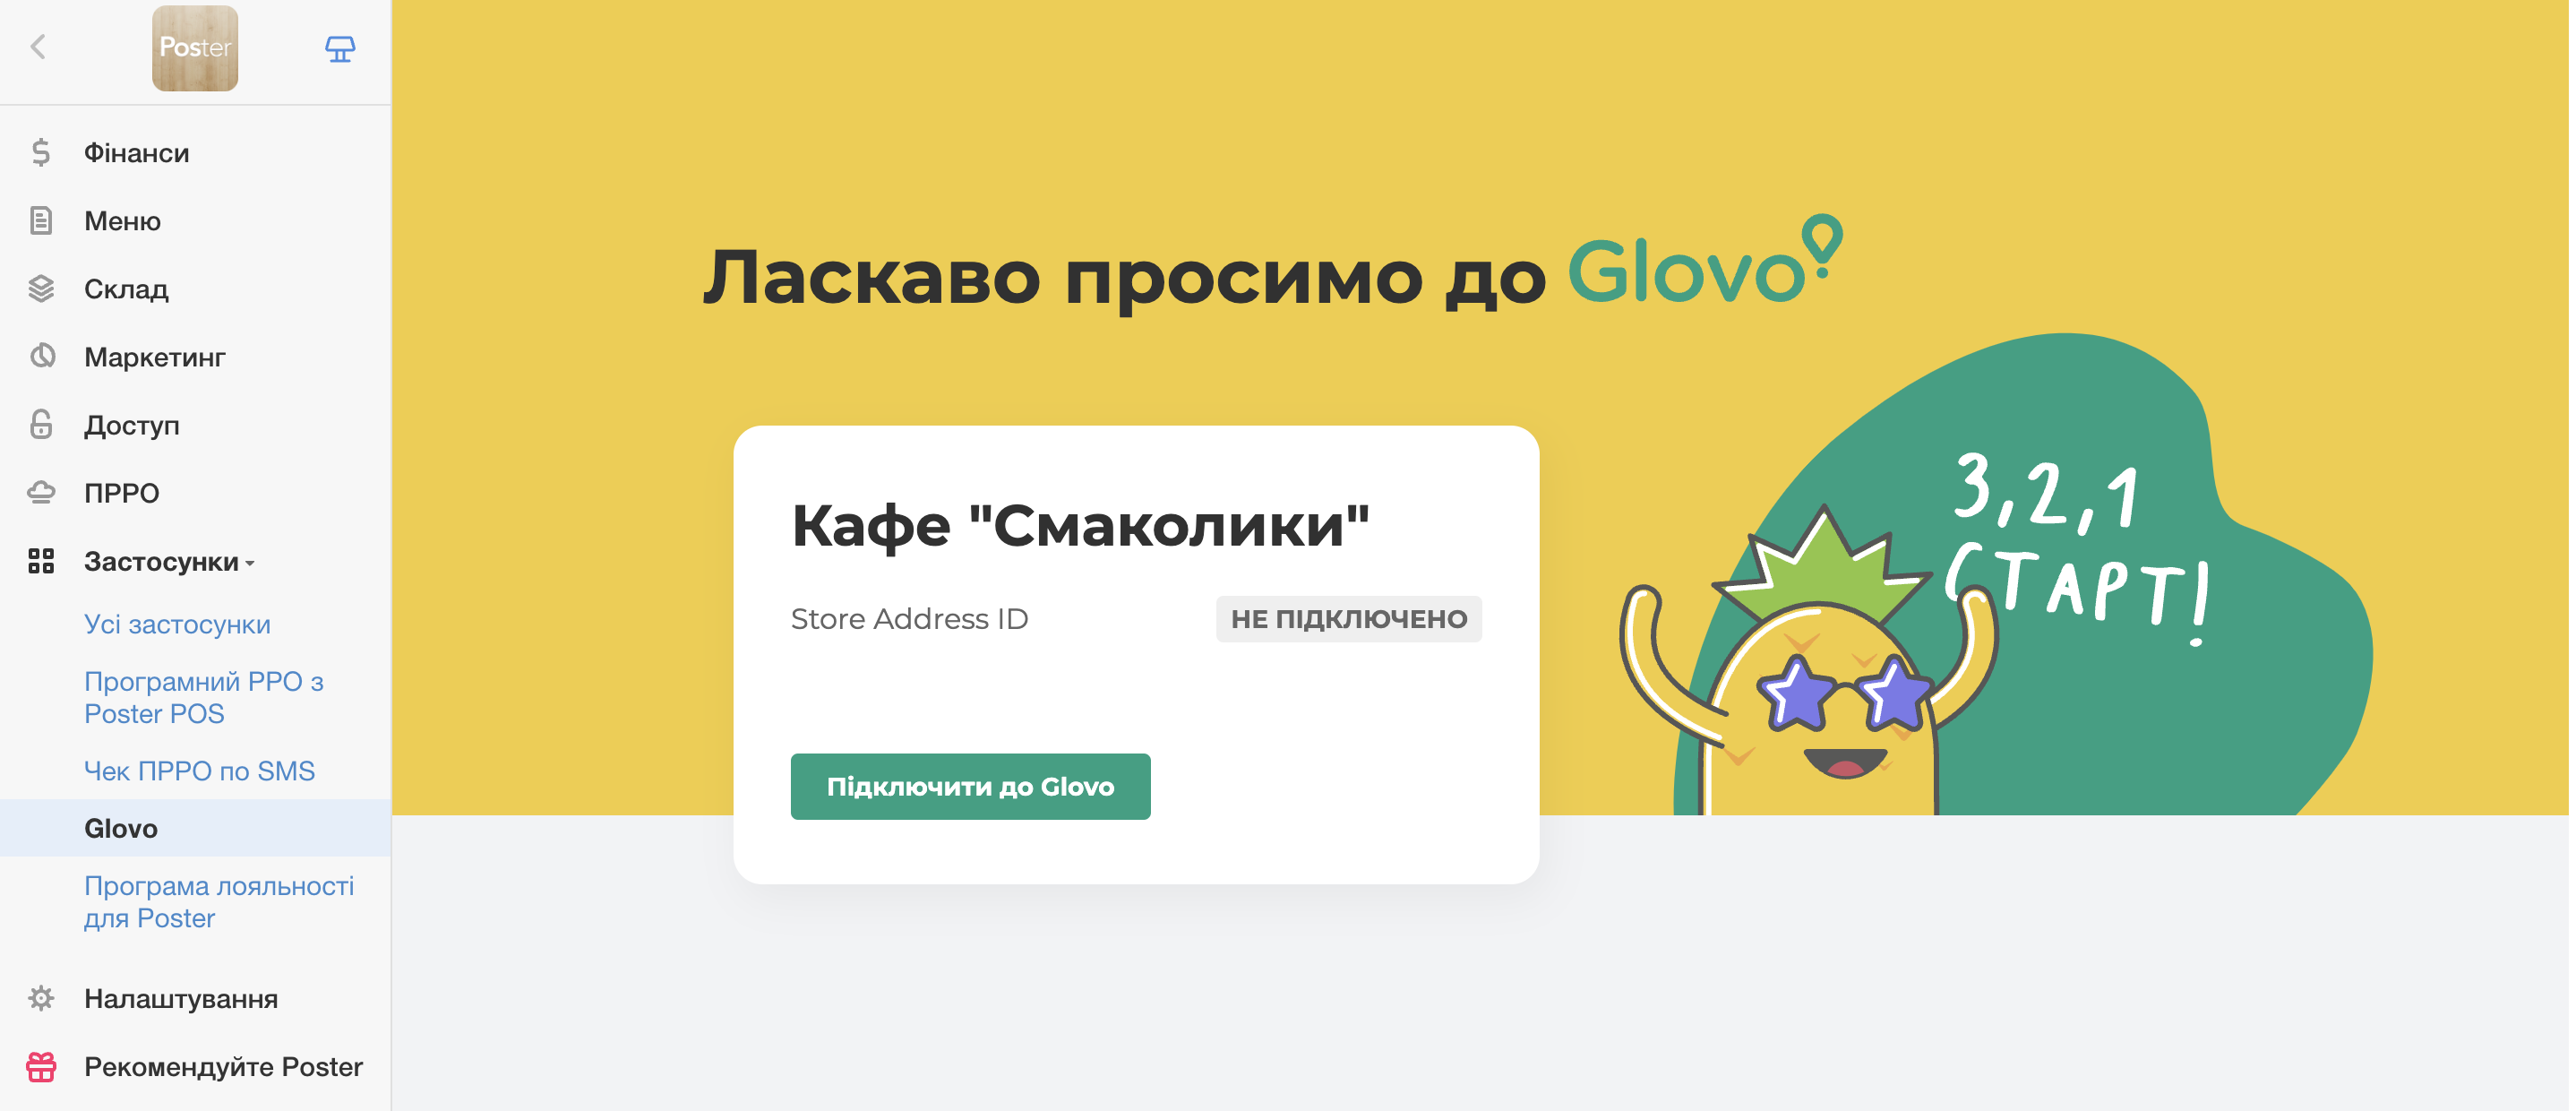 Integration of menus and orders from Glovo